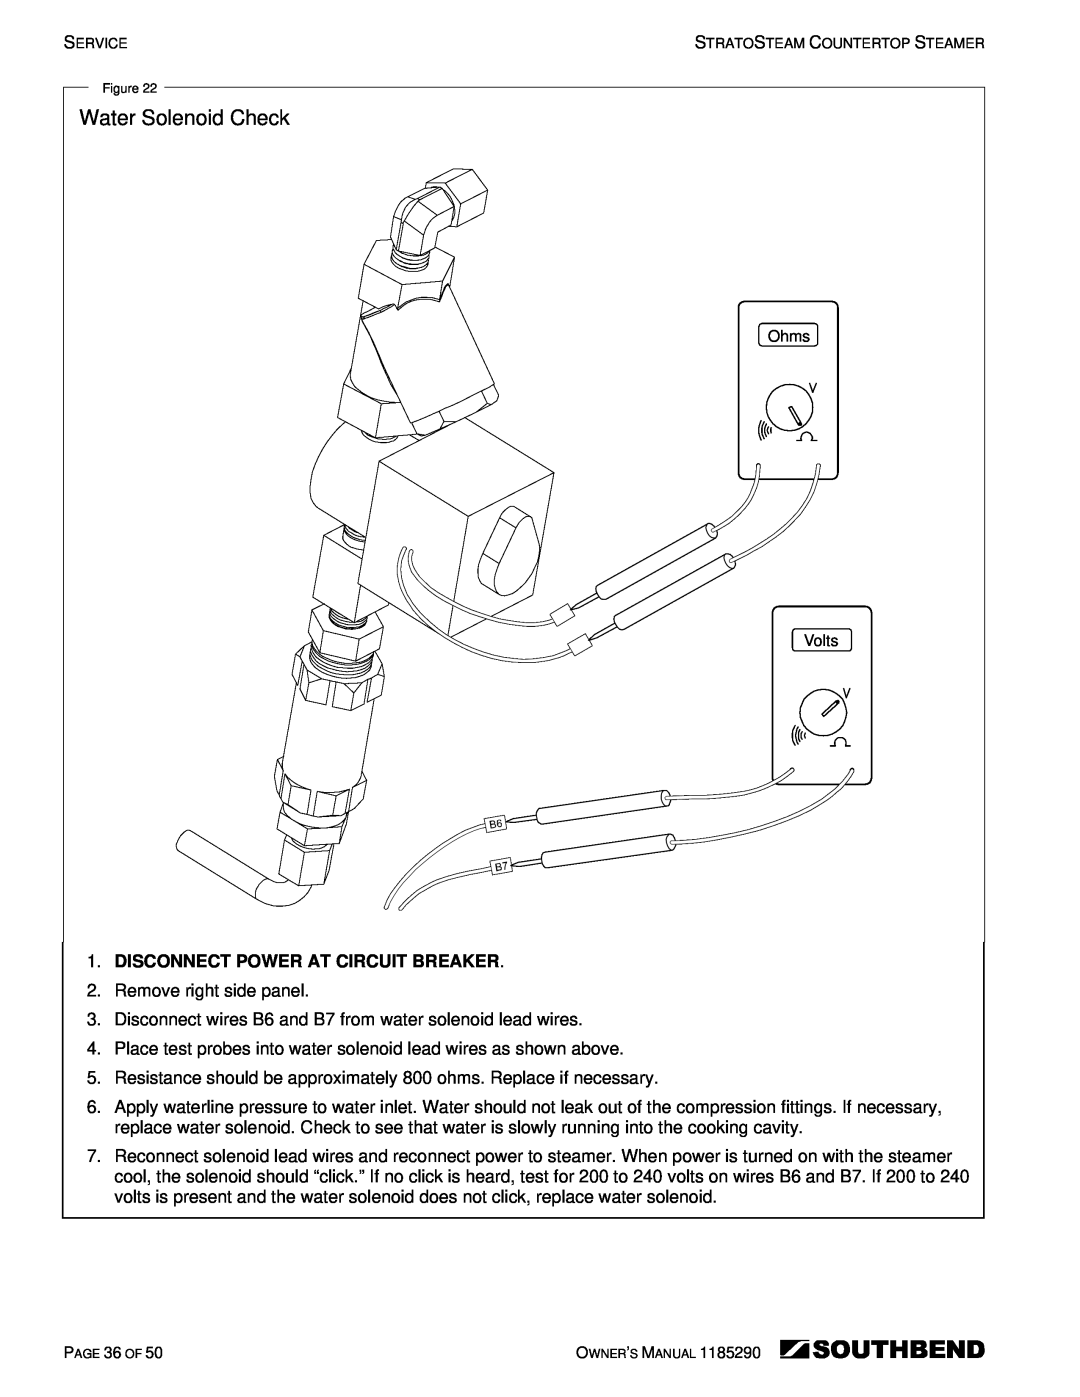 Southbend STRG-5D, STRG-3D manual Water Solenoid Check, Disconnect Power At Circuit Breaker, PAGE 36 OF 